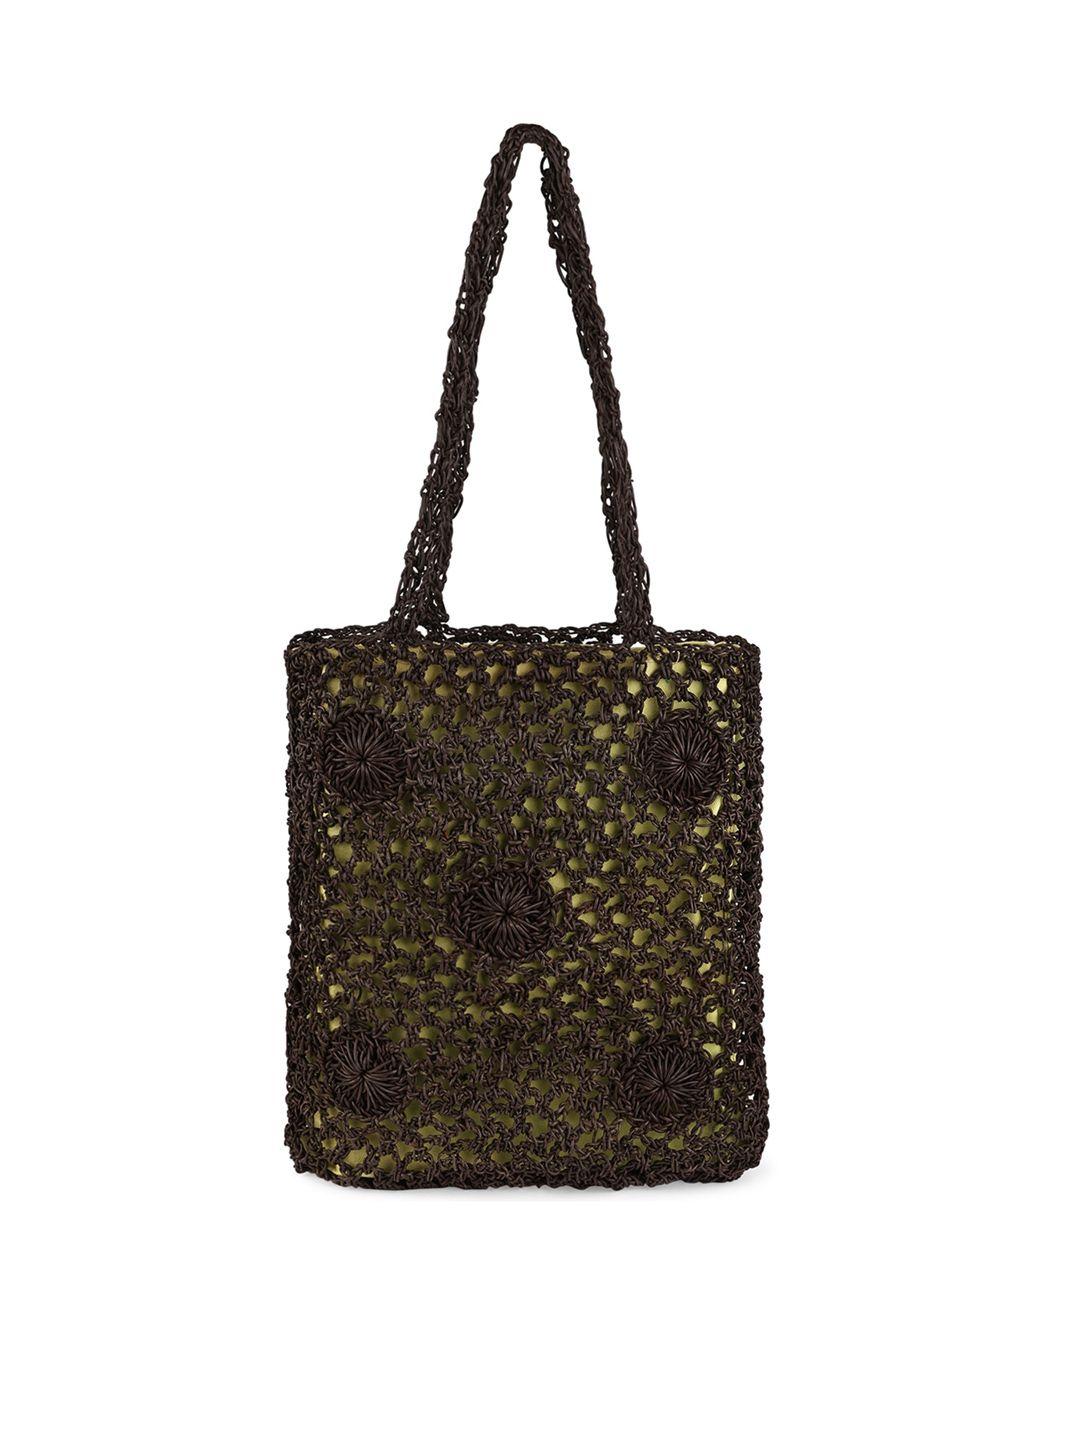 rediscover fashion swagger tote bag